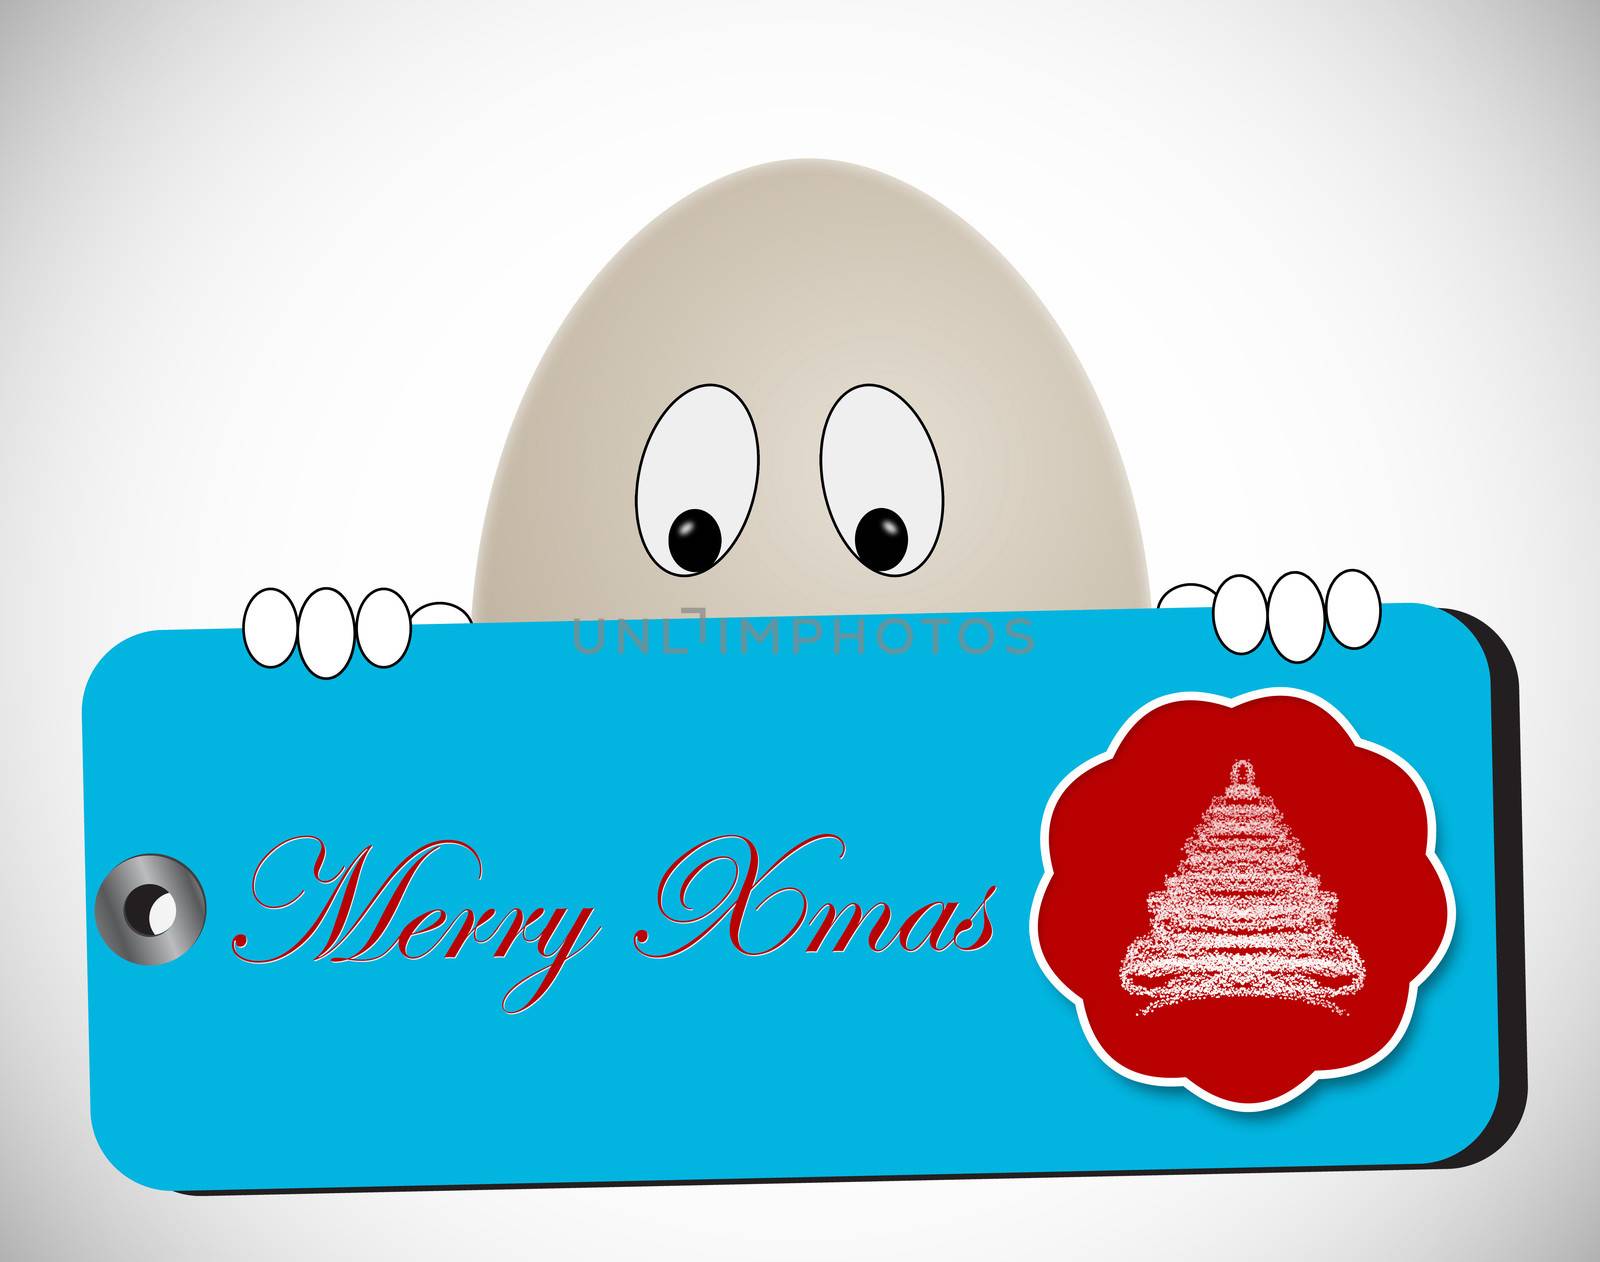 egg shaped character with merry christmas tag by motionkarma